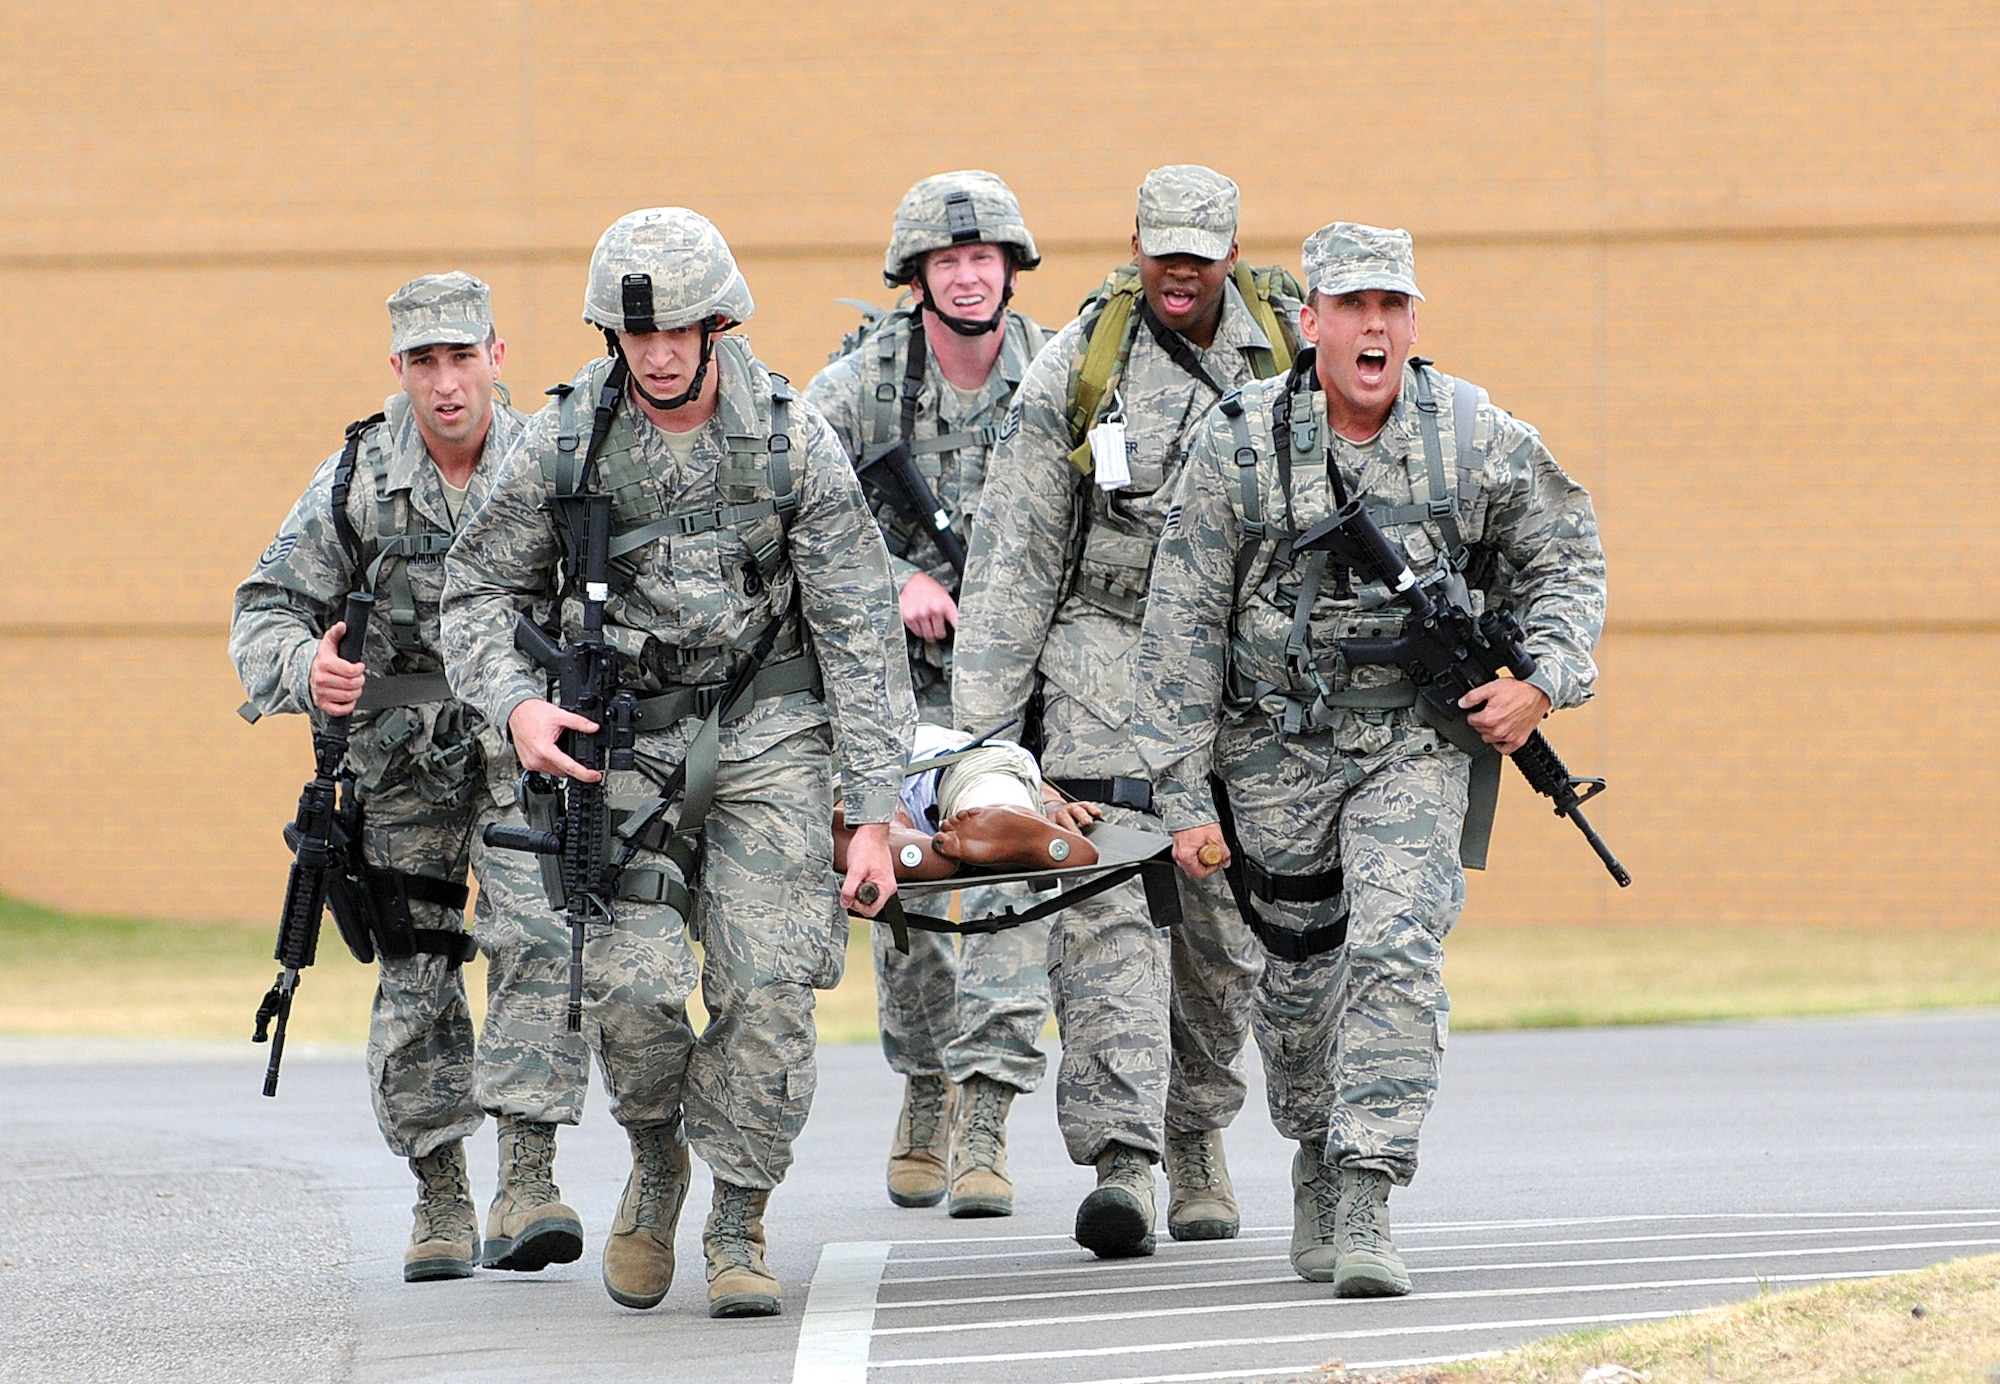 After a half-mile uphill litter carry race in the Self-Aid/Buddy Care challenge, the 507th Air Refueling Wing Security Forces Squadron team wills themselves to the finish line during the Nov. 10 Defender Challenge competition. Six teams from Tinker’s 72nd Security Forces, Altus’ 97th SFS and Tinker’s 507th ARW/SFS were pushed to the limits in various combat skills during the first event of its kind here since the 1980s. .  (Air Force photo by Margo Wright)